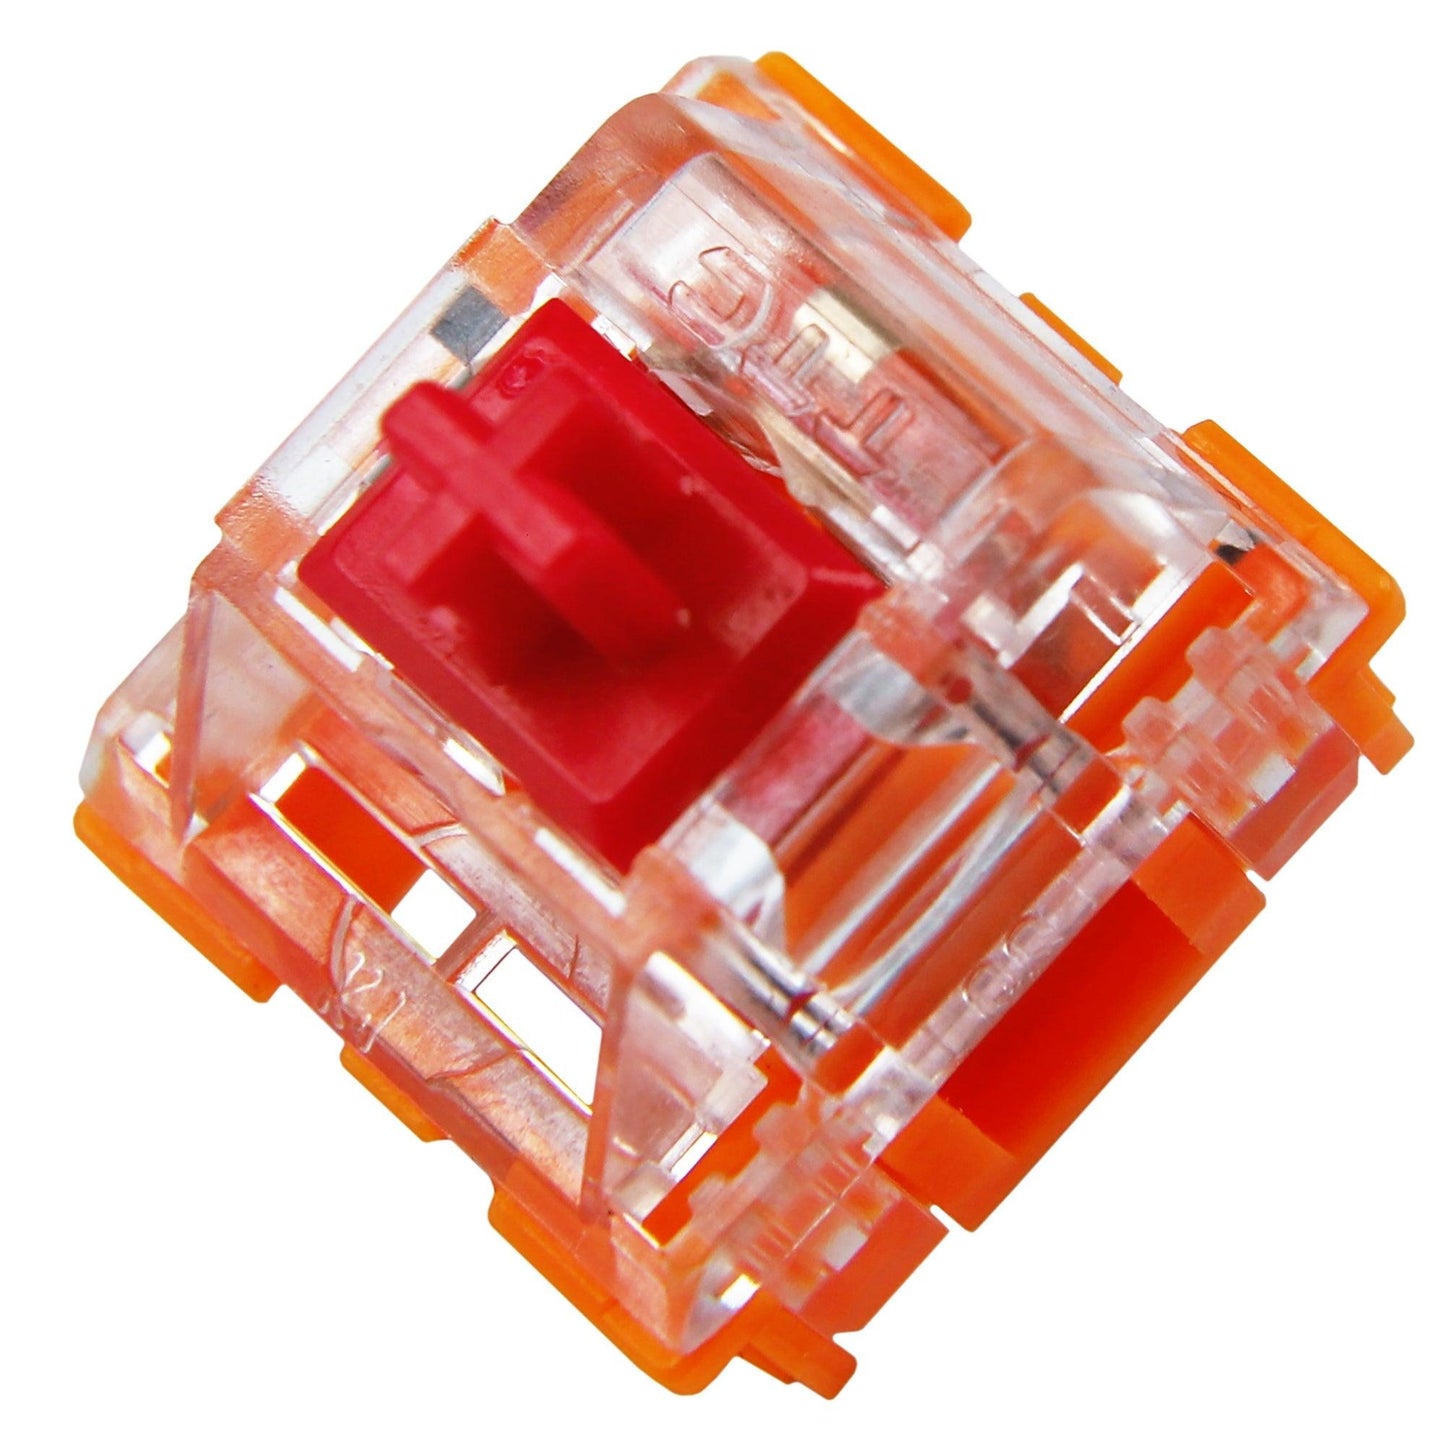 TTC 3 pin V3 Gold Brown Gold Red (Factory Pre-lubed) SMD Switches For MX Mechanical Keyboard - IPOPULARSHOP